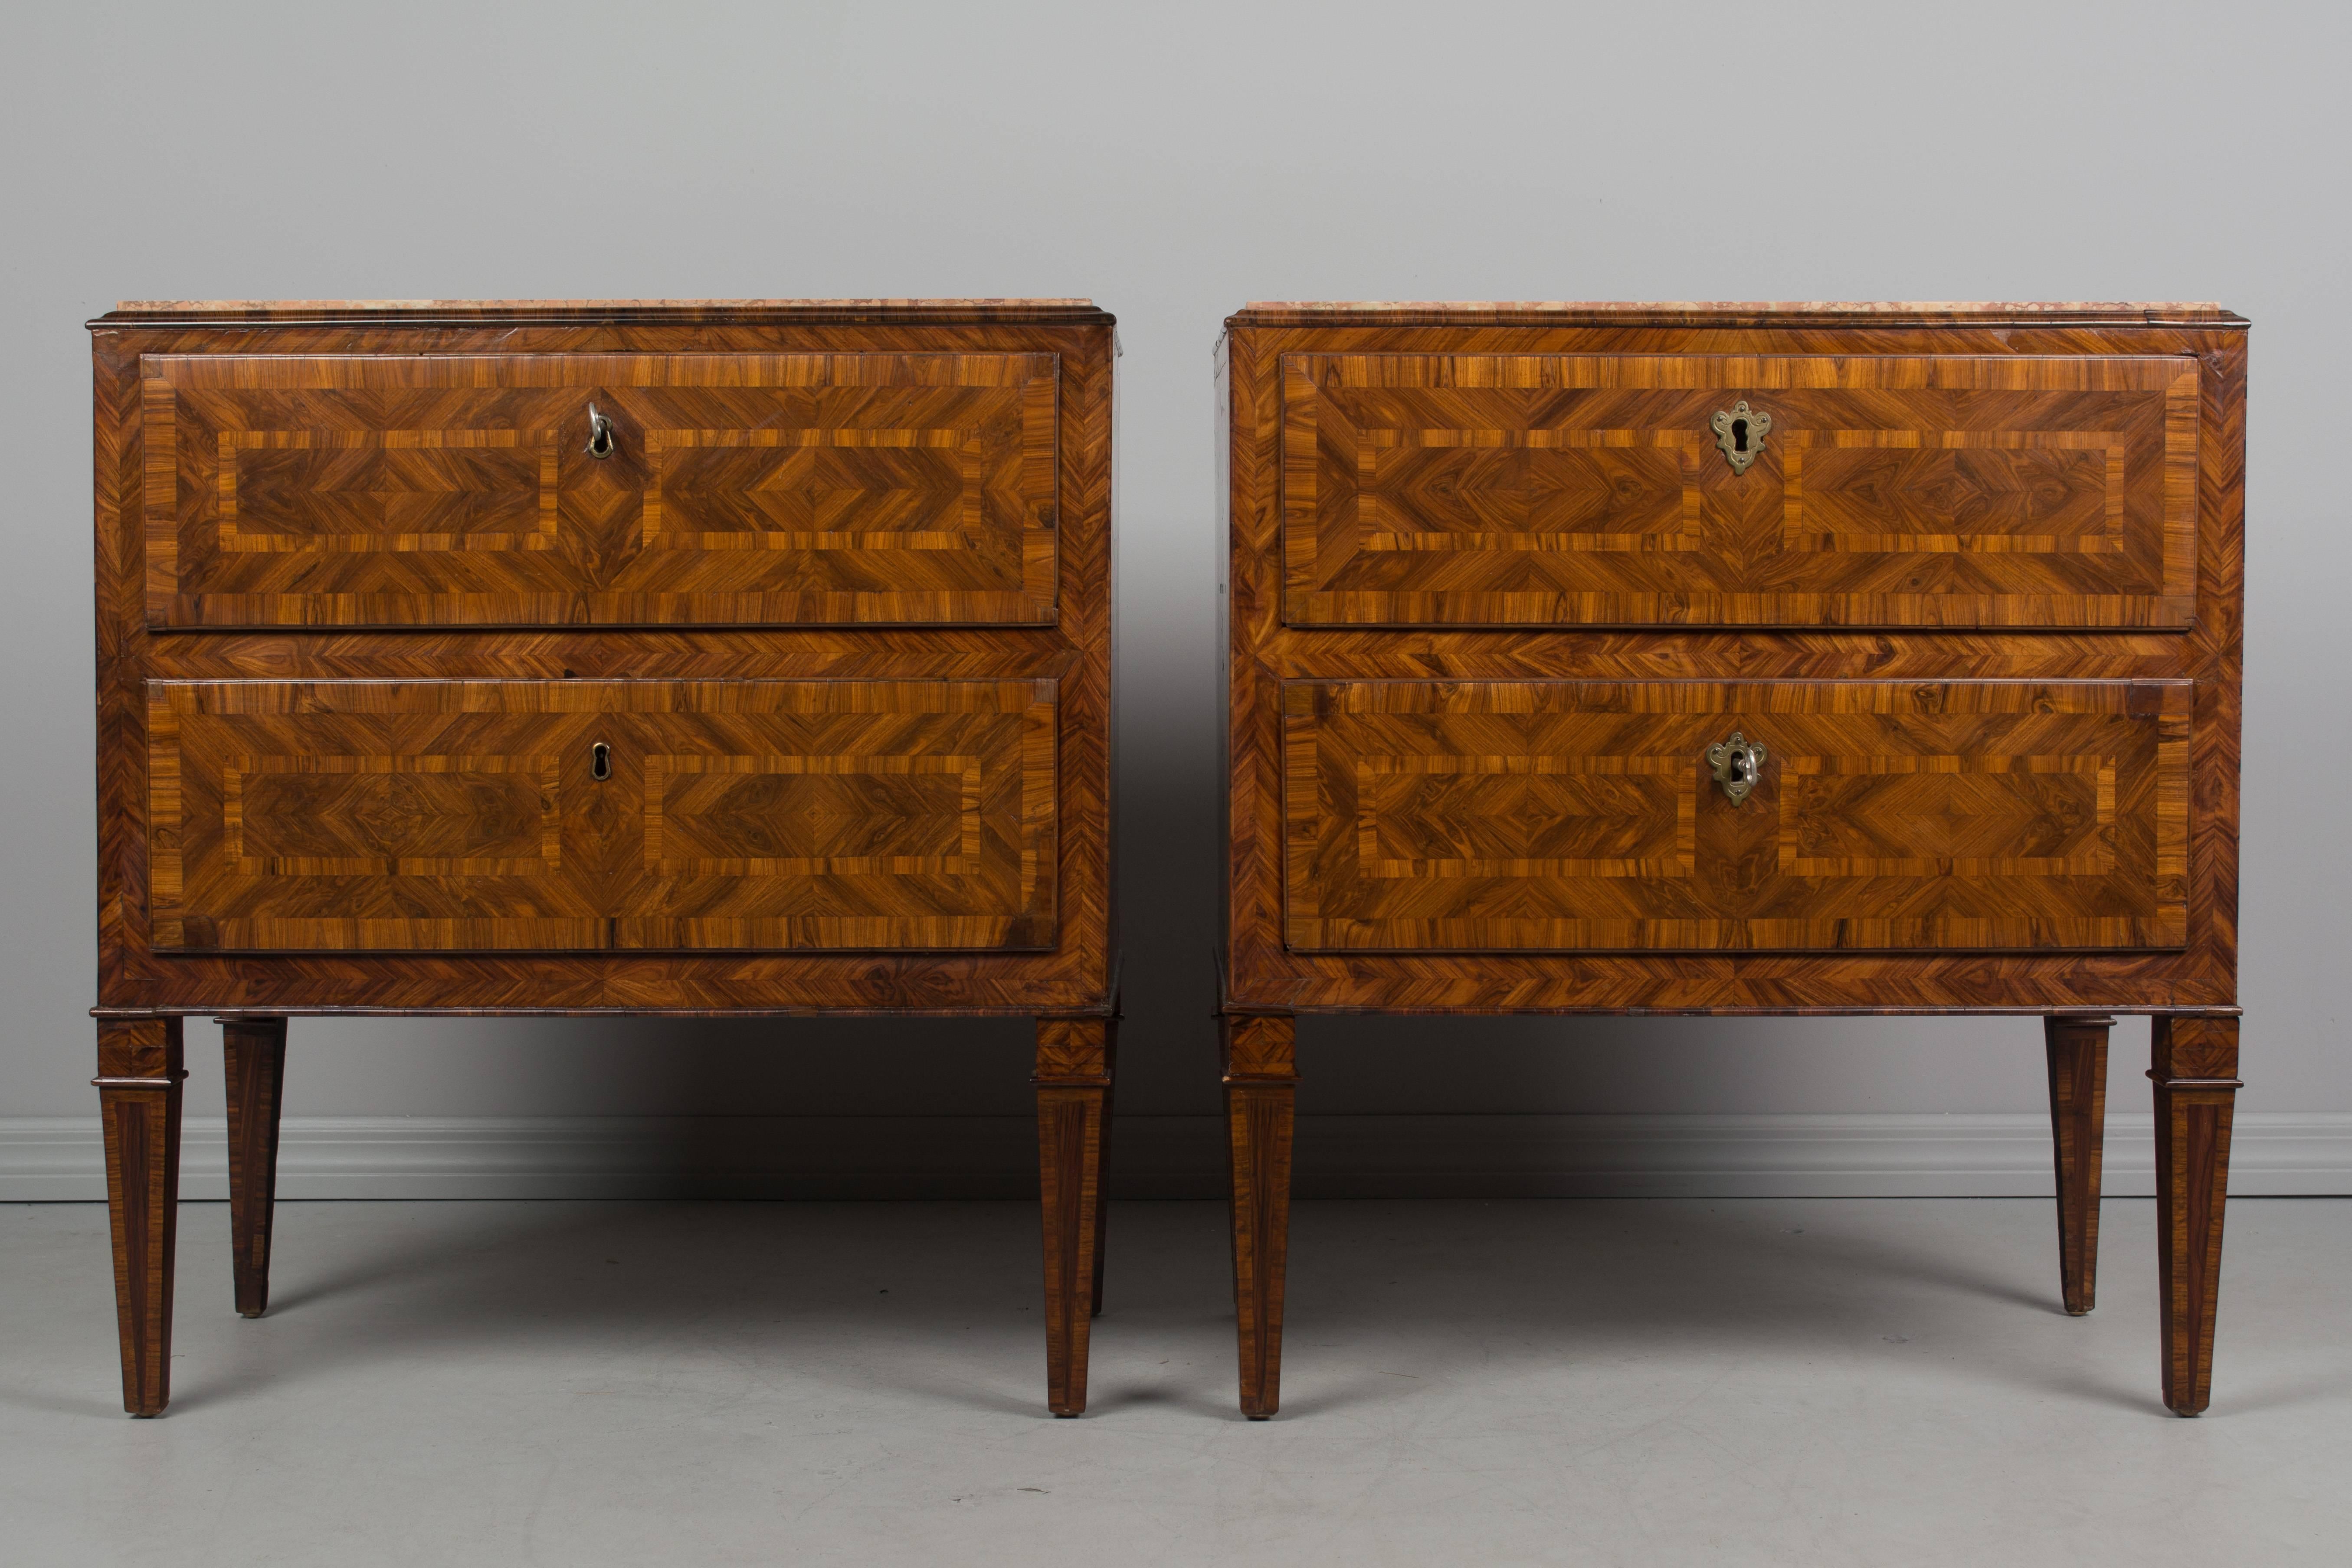 A pair of 18th century Italian commode or small chest of drawers with fine marquetry inlay using veneers of walnut and burl of walnut. French polish finish. Pine as a secondary wood. Two dovetailed drawers on tapered legs. Working locks with two